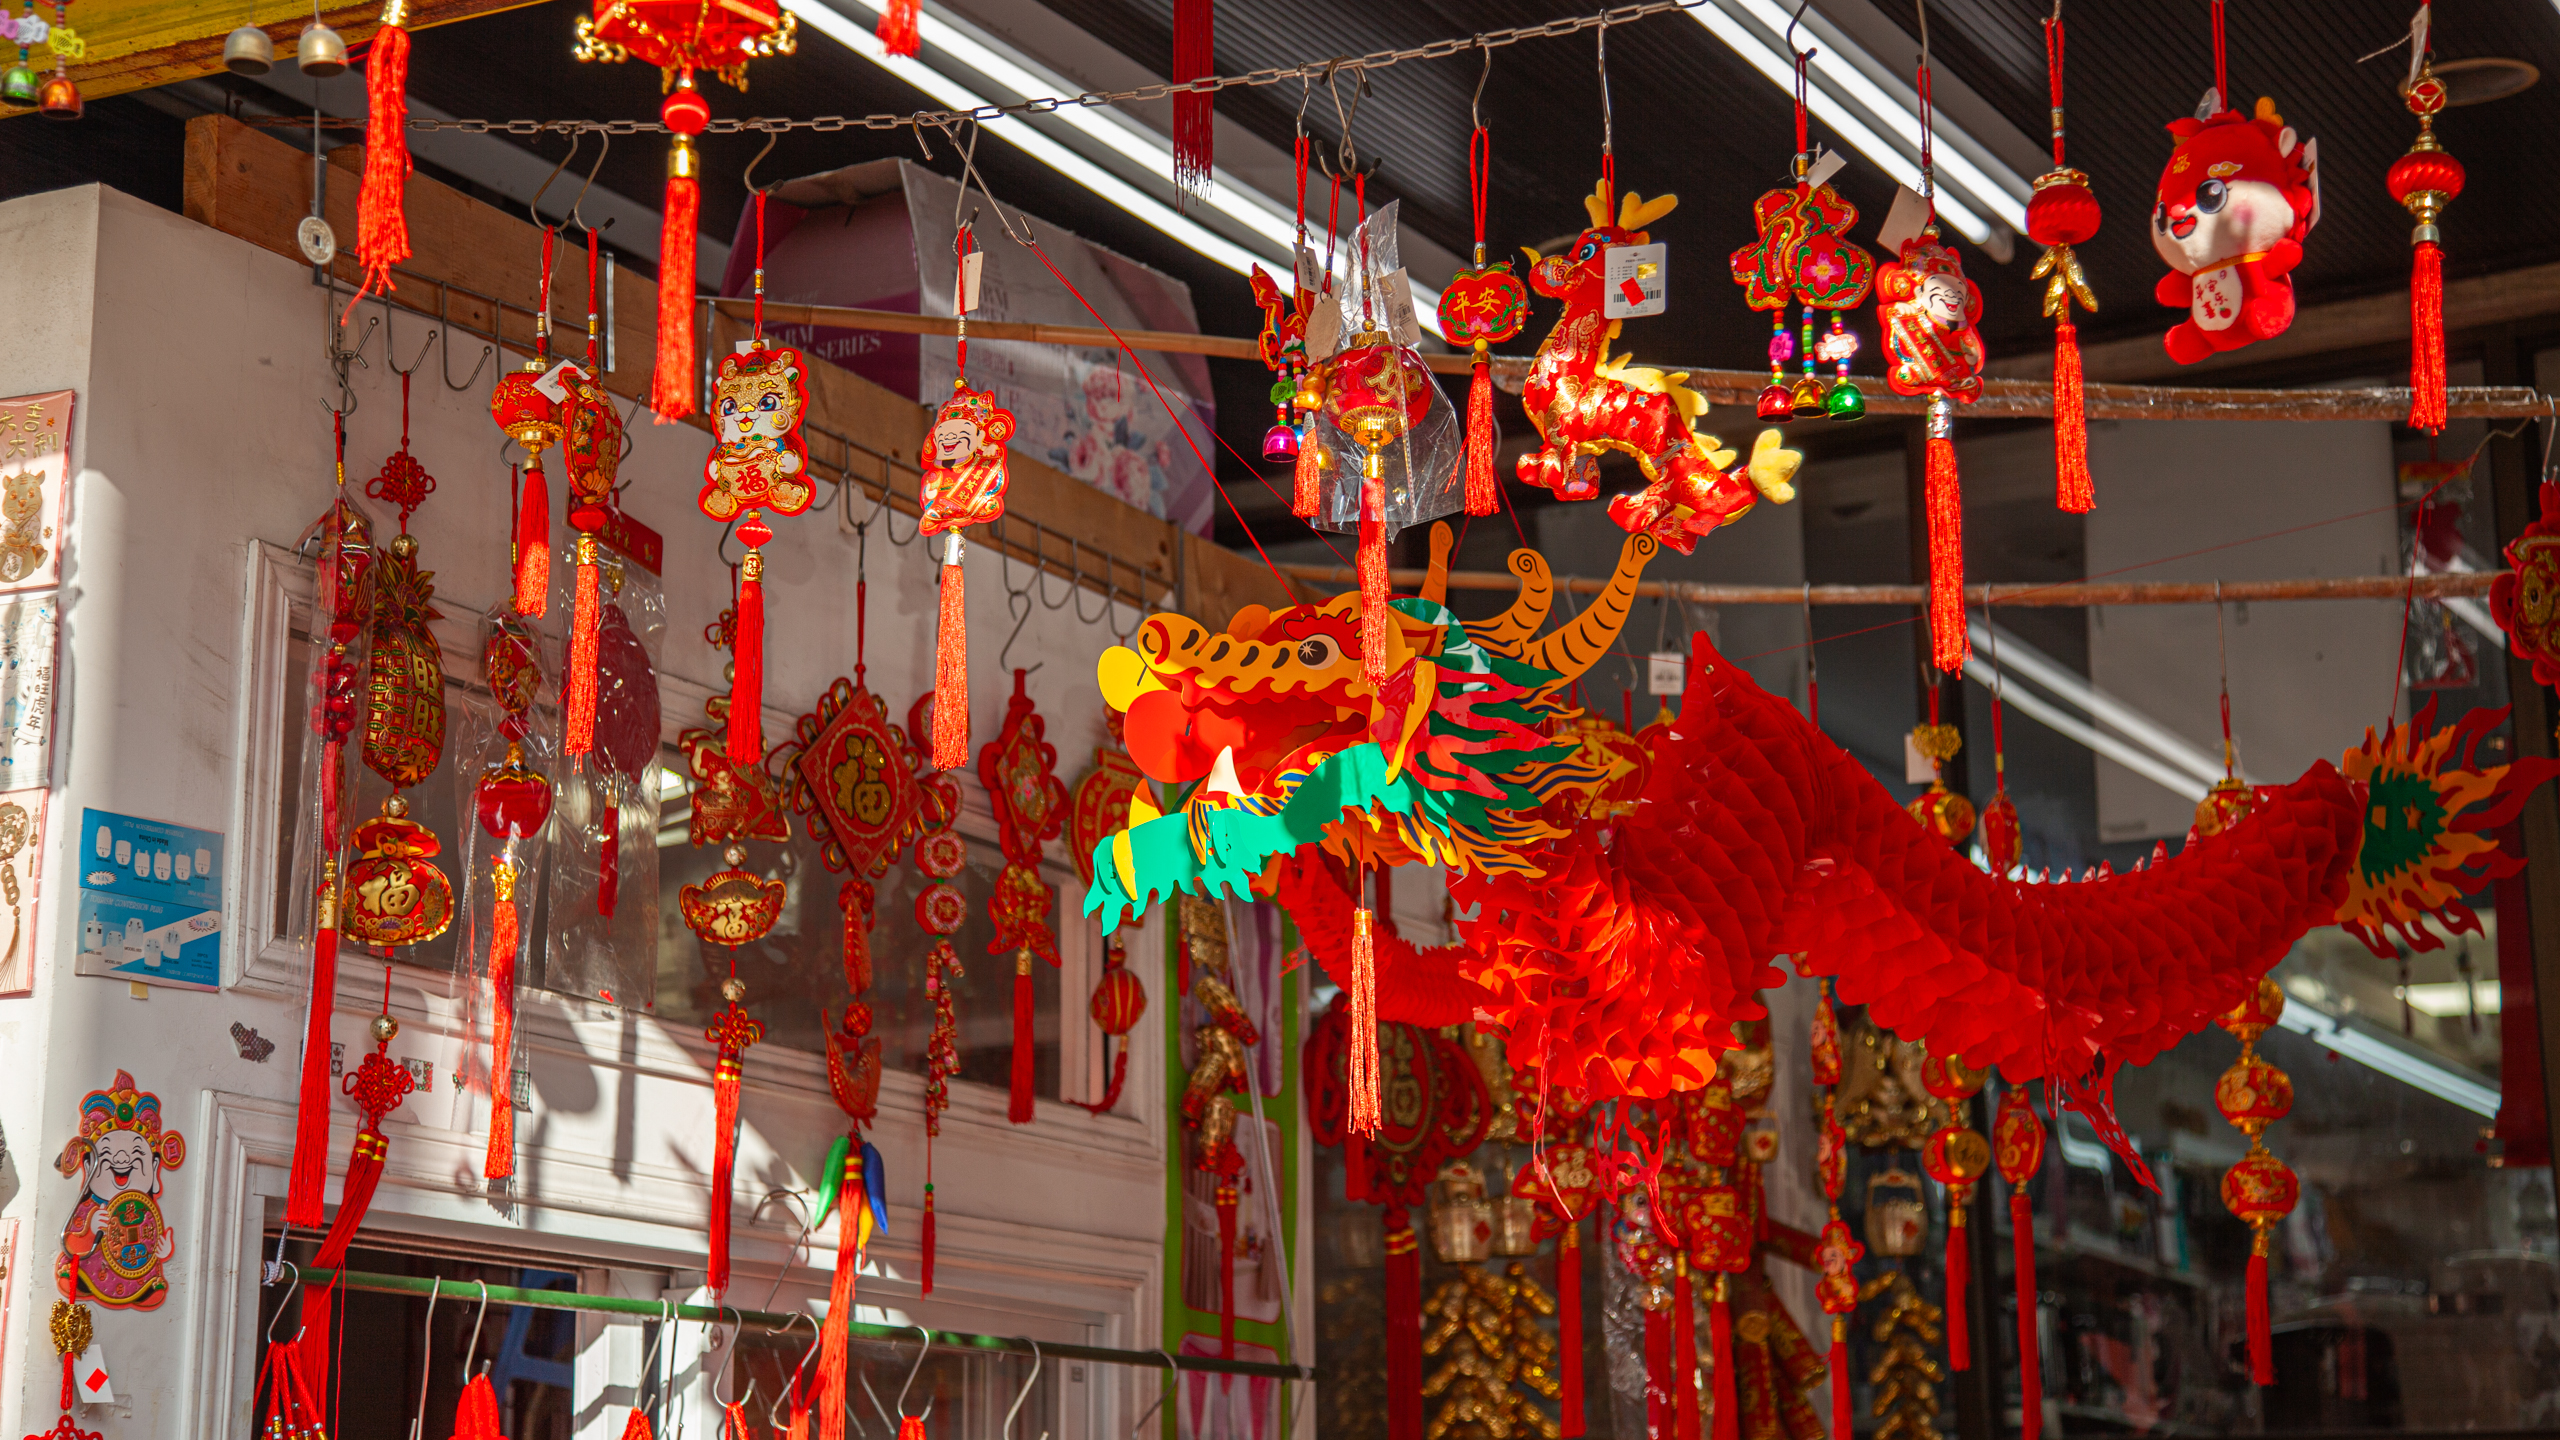 Superstitions meets tradition as TMU students ring in Lunar New Year